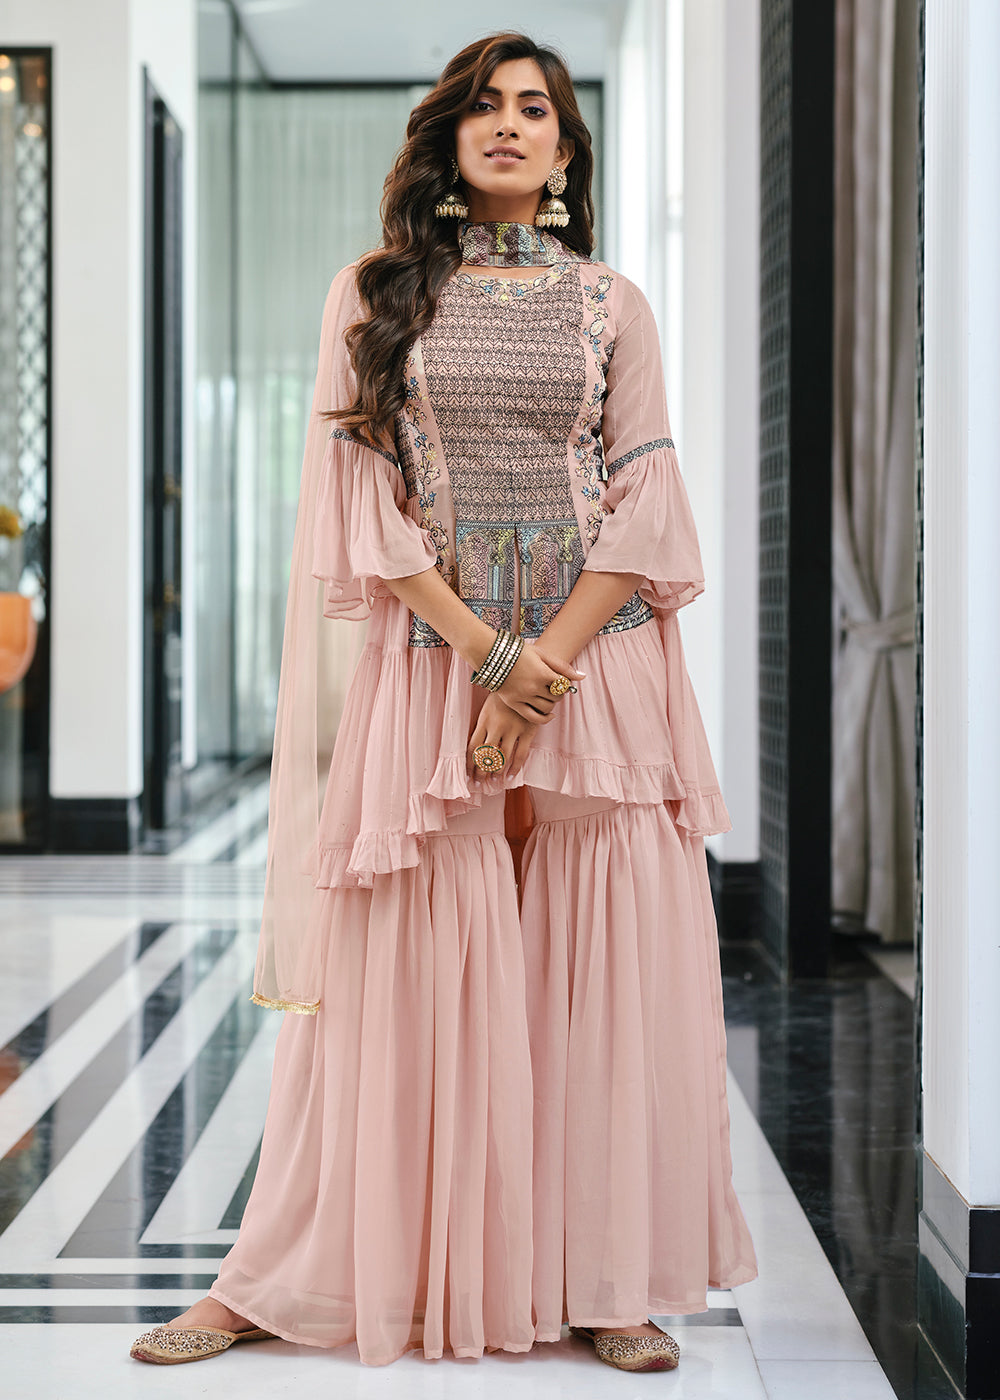 Buy Now Admirable Mauve Pink Party Festive Palazzo Salwar Suit Online in USA, UK, Canada, Germany & Worldwide at Empress Clothing. 